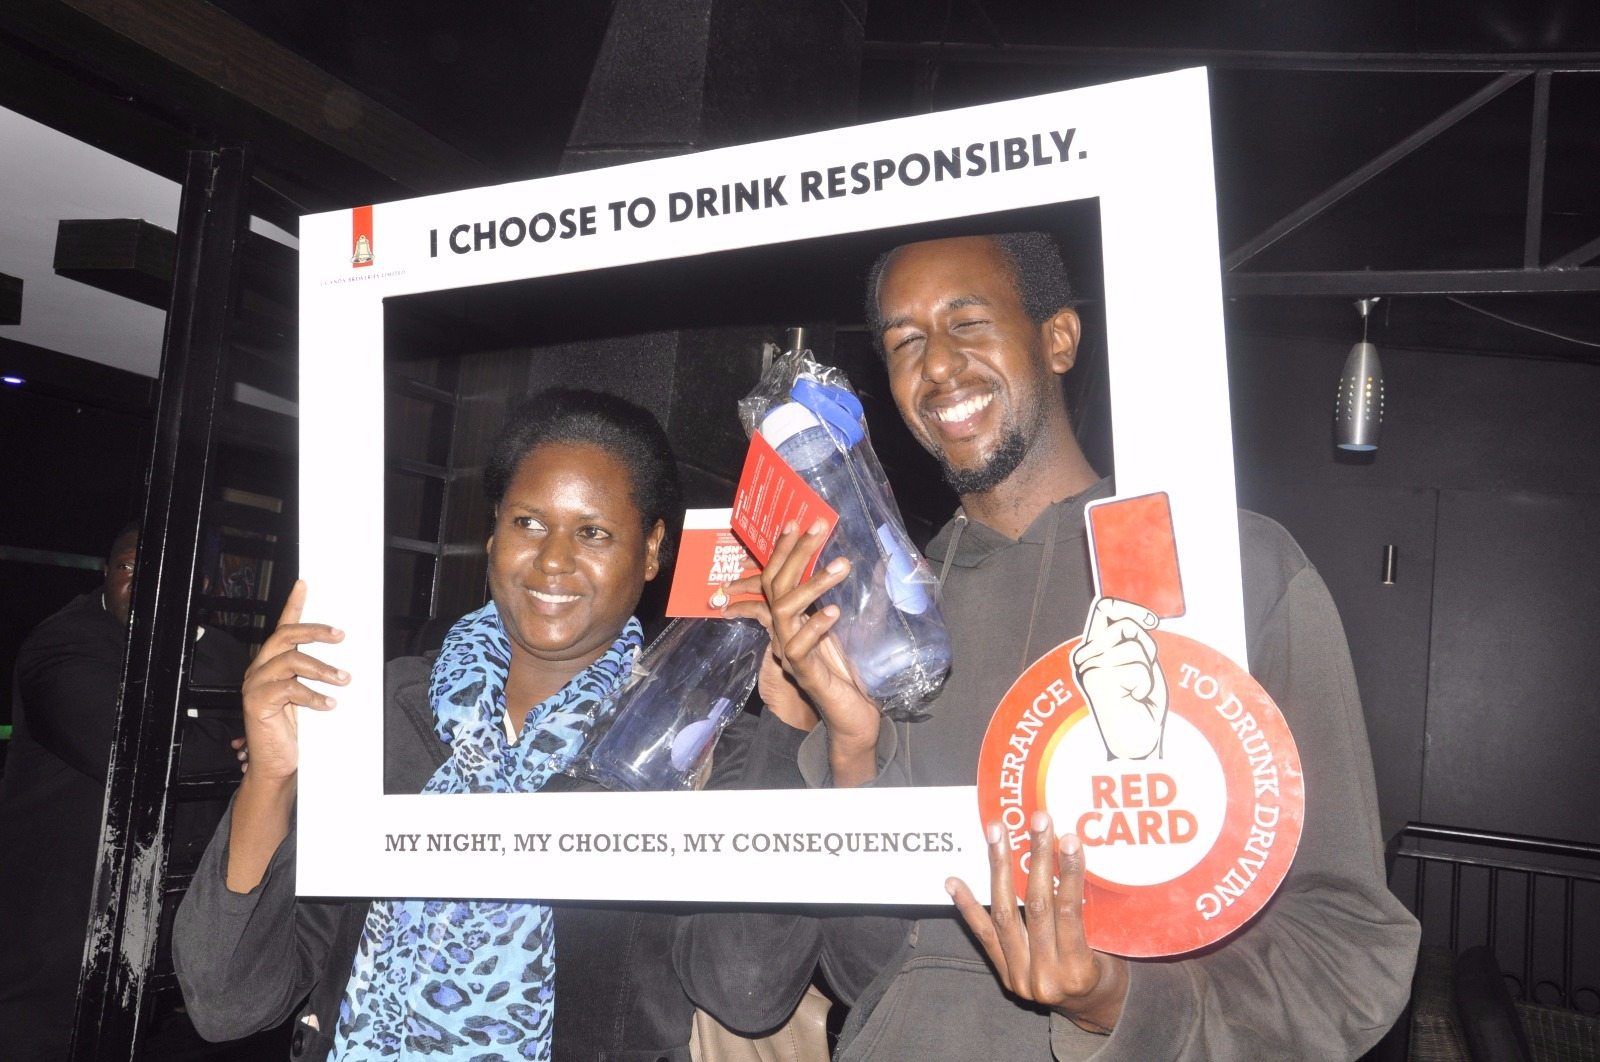 3. These lovely people pledged not to drink and drive